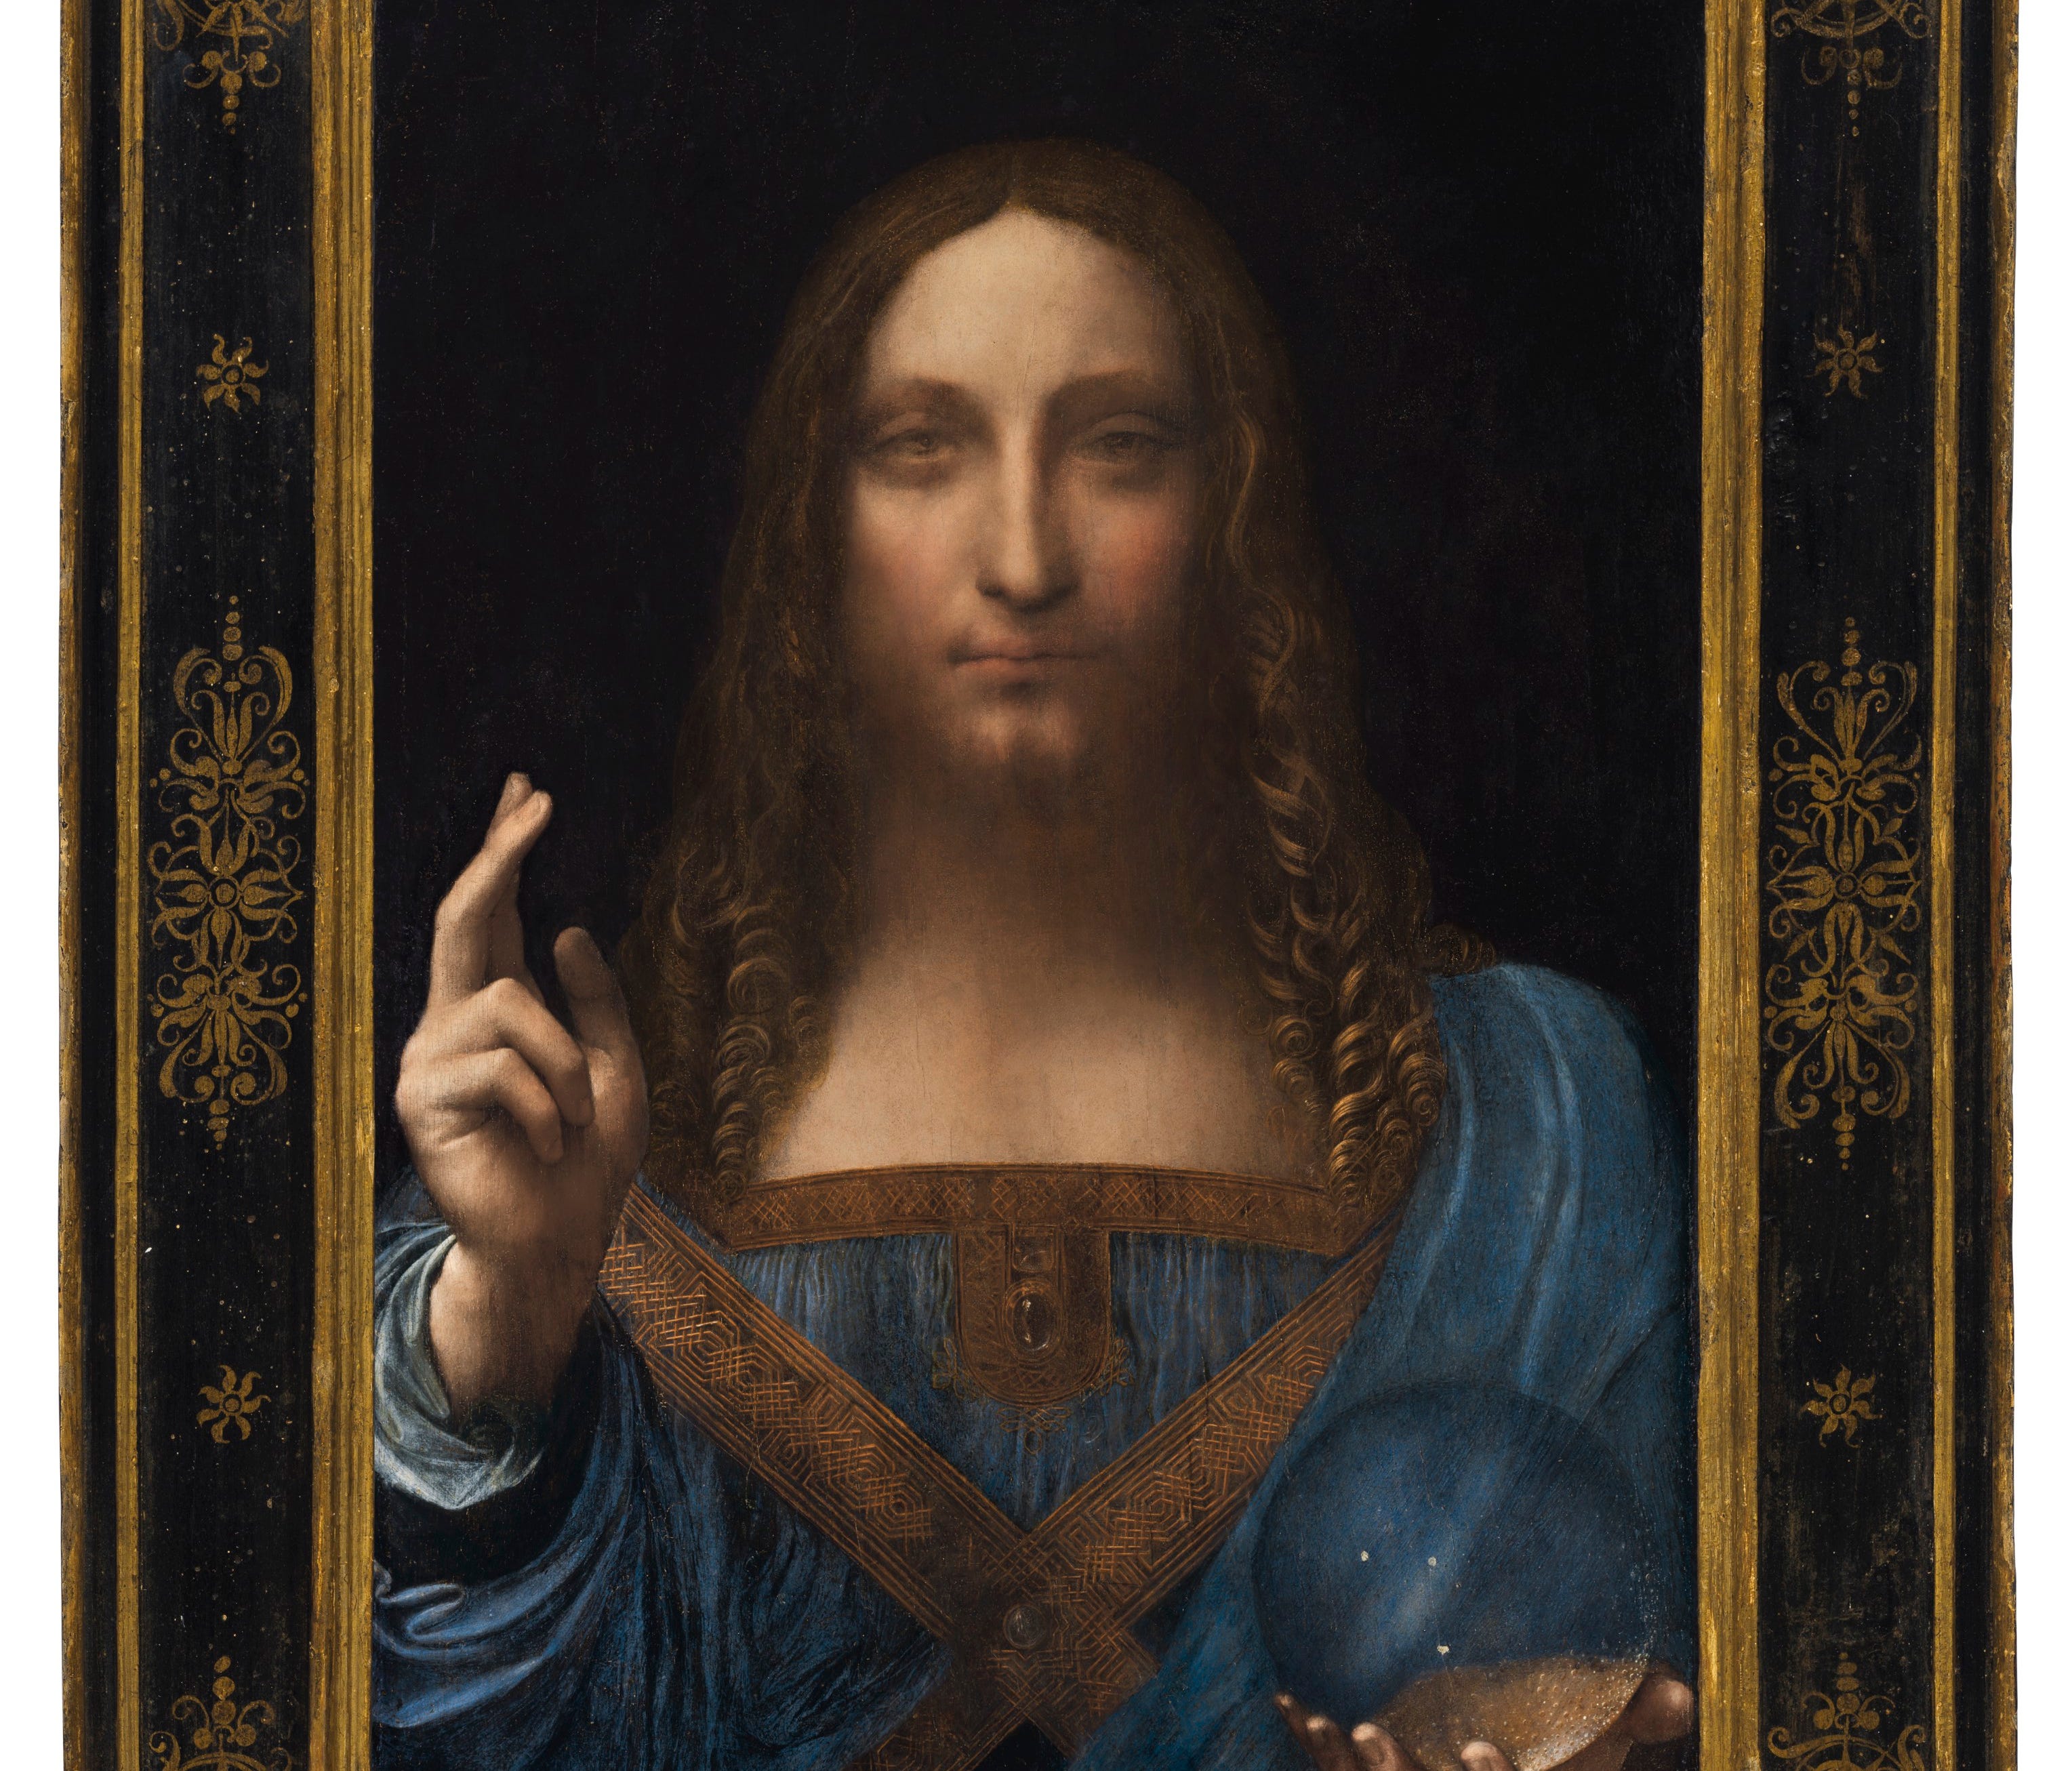 Leonardo Da Vinci's once-lost masterpiece, Salvator Mundi, goes on sale Nov. 15 in New York for what is expected to be a sale price north of $100 million.